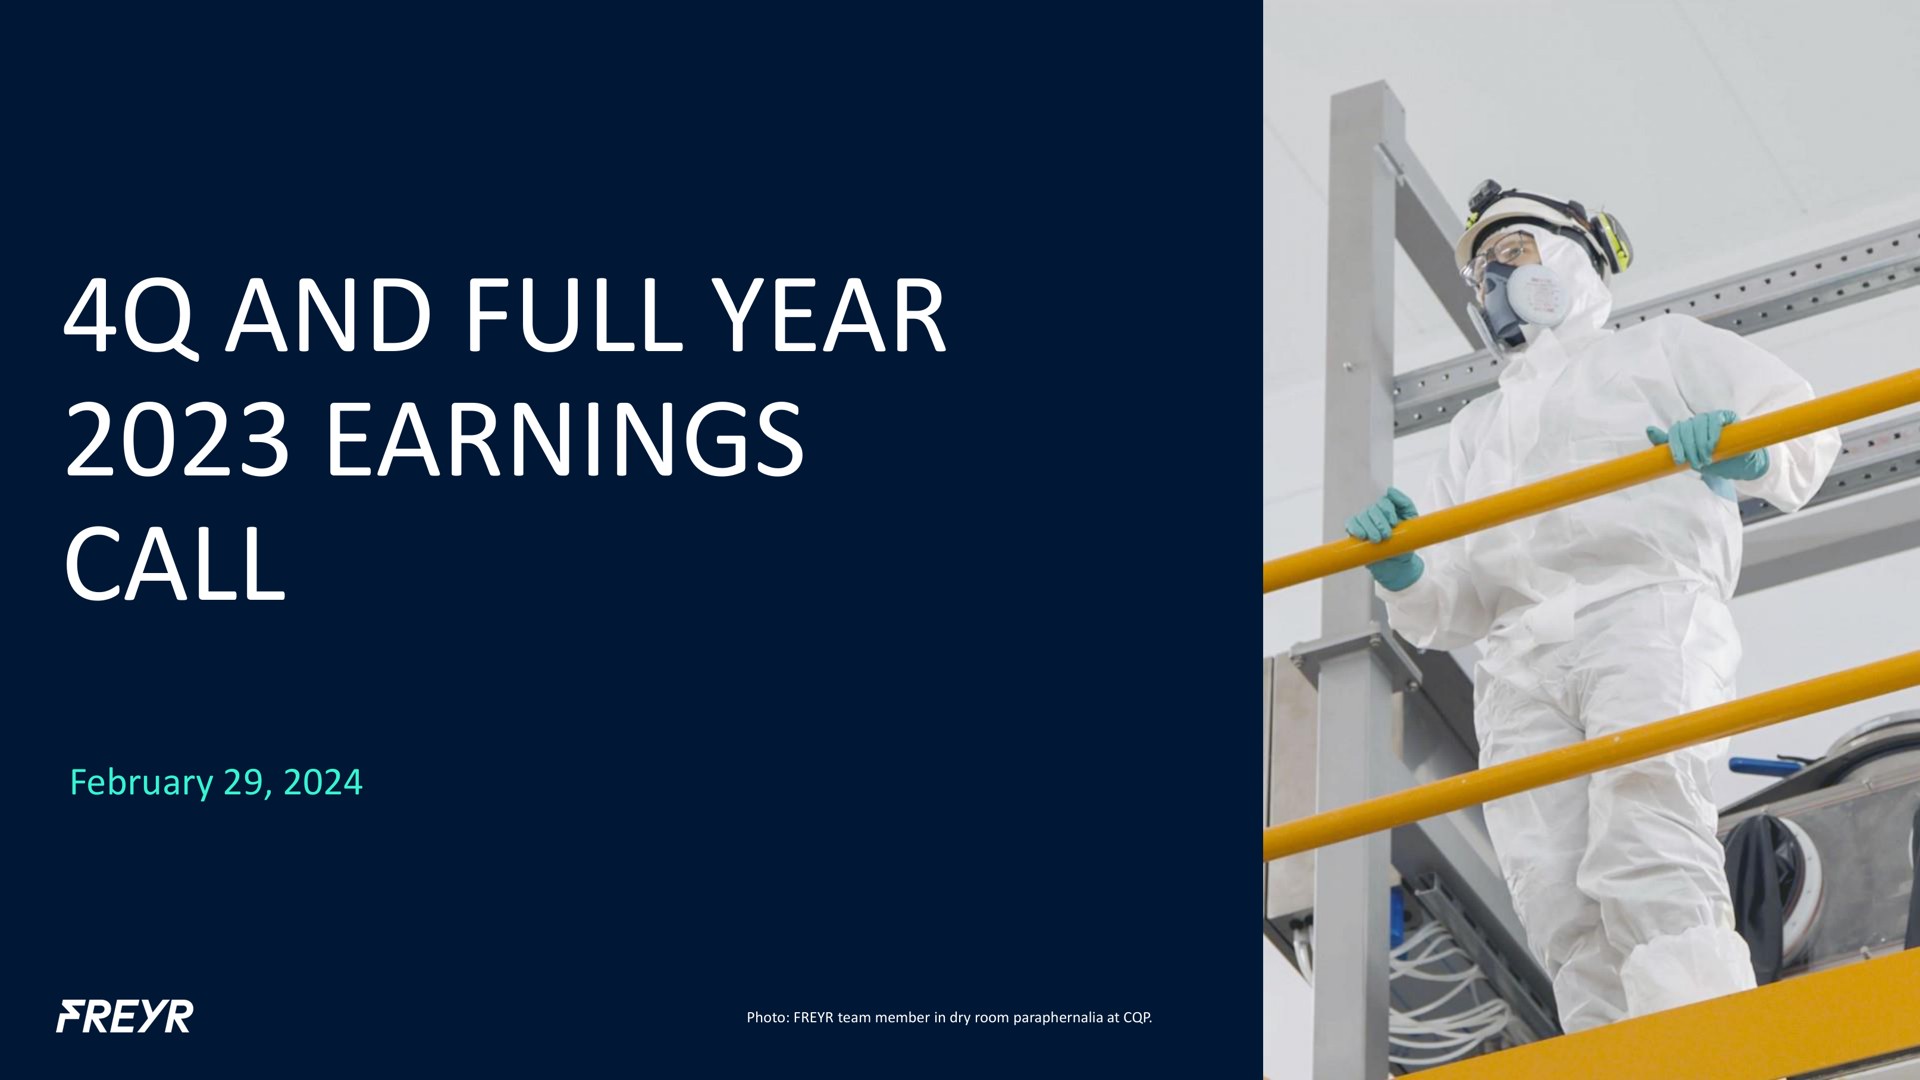 and full year earnings call | Freyr